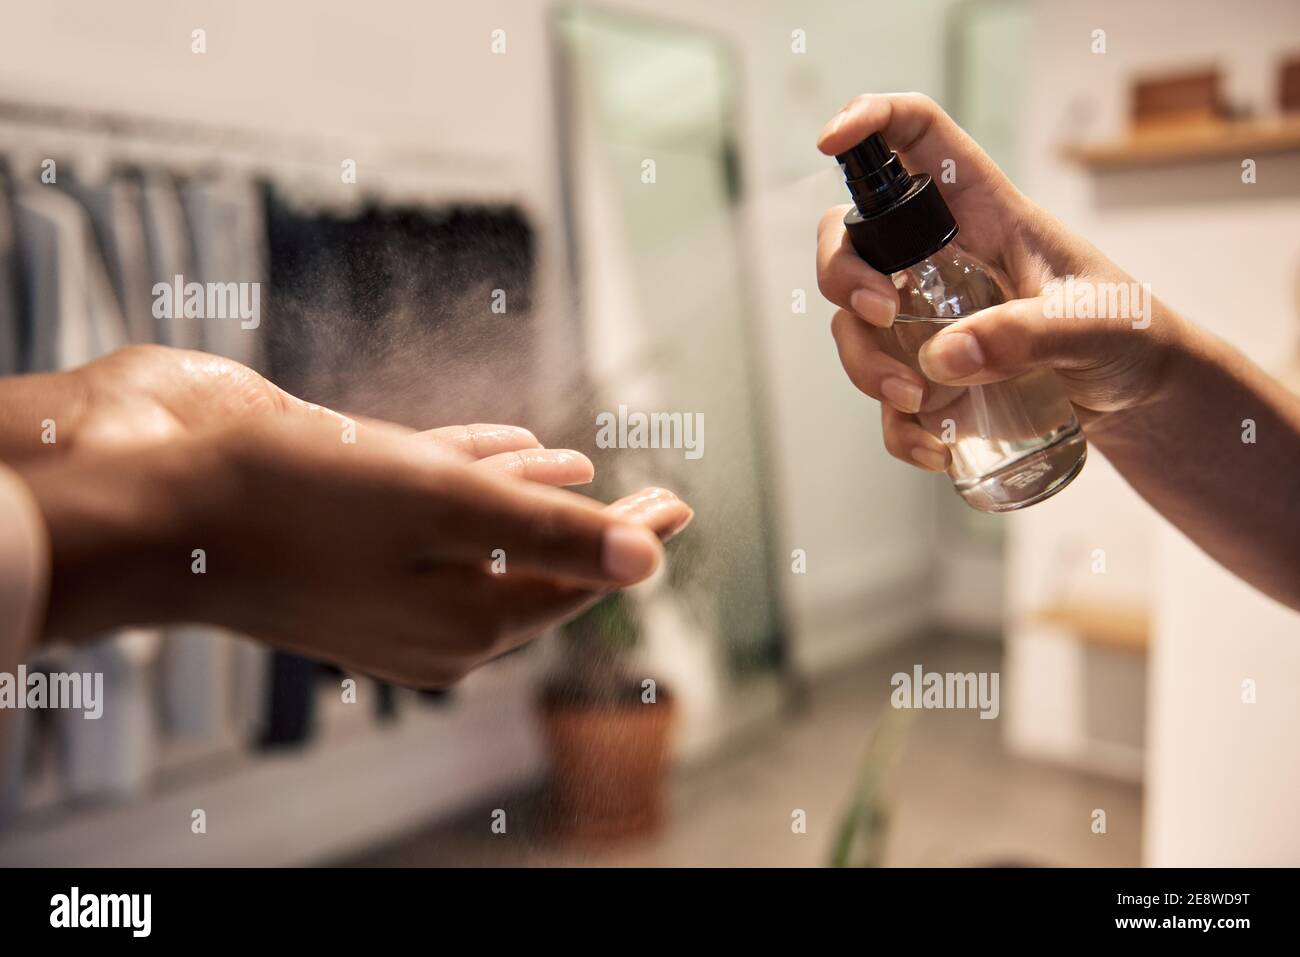 Shop assistant applying sanitizer on a customer's hands Stock Photo